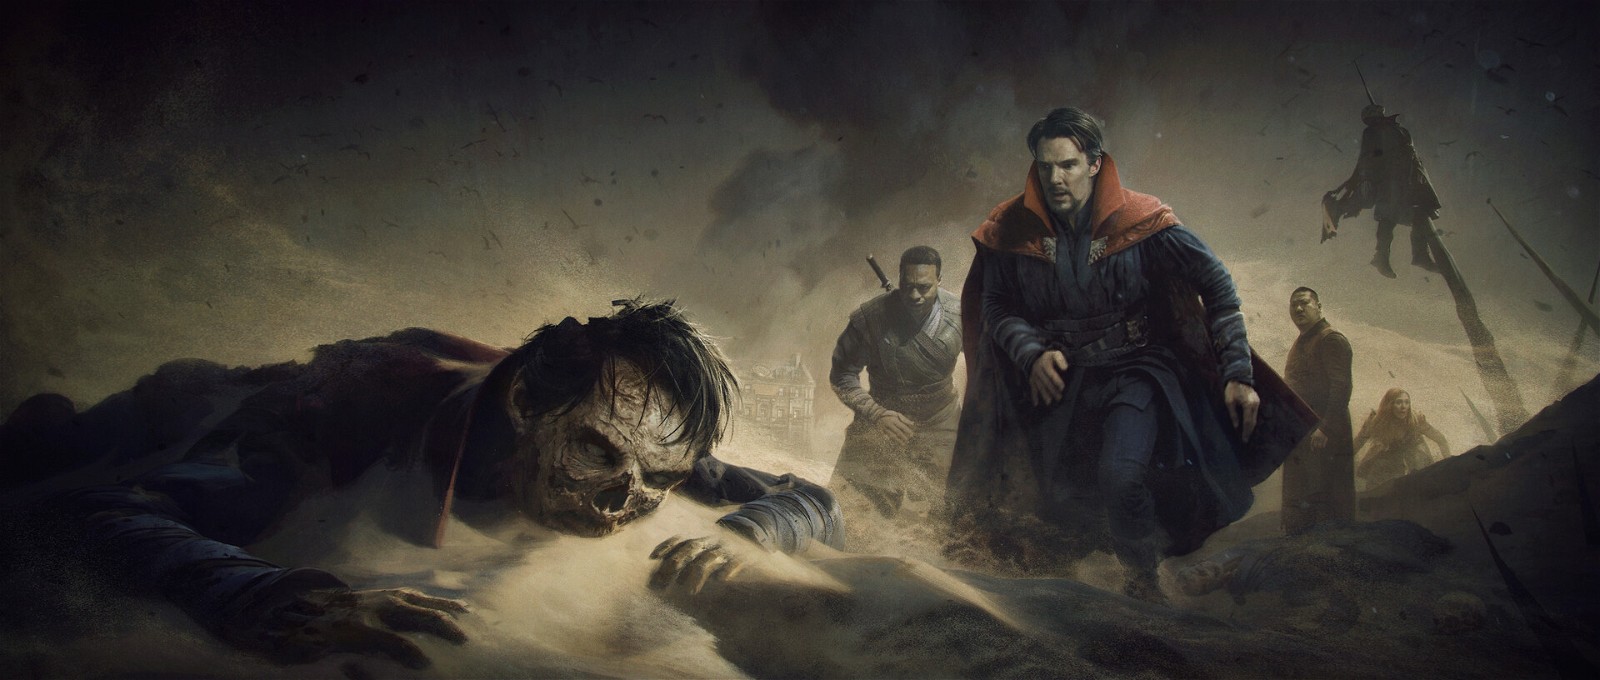 The concept art created by Thomas du Crest shows Benedict Cumberbatch in the Incursion.